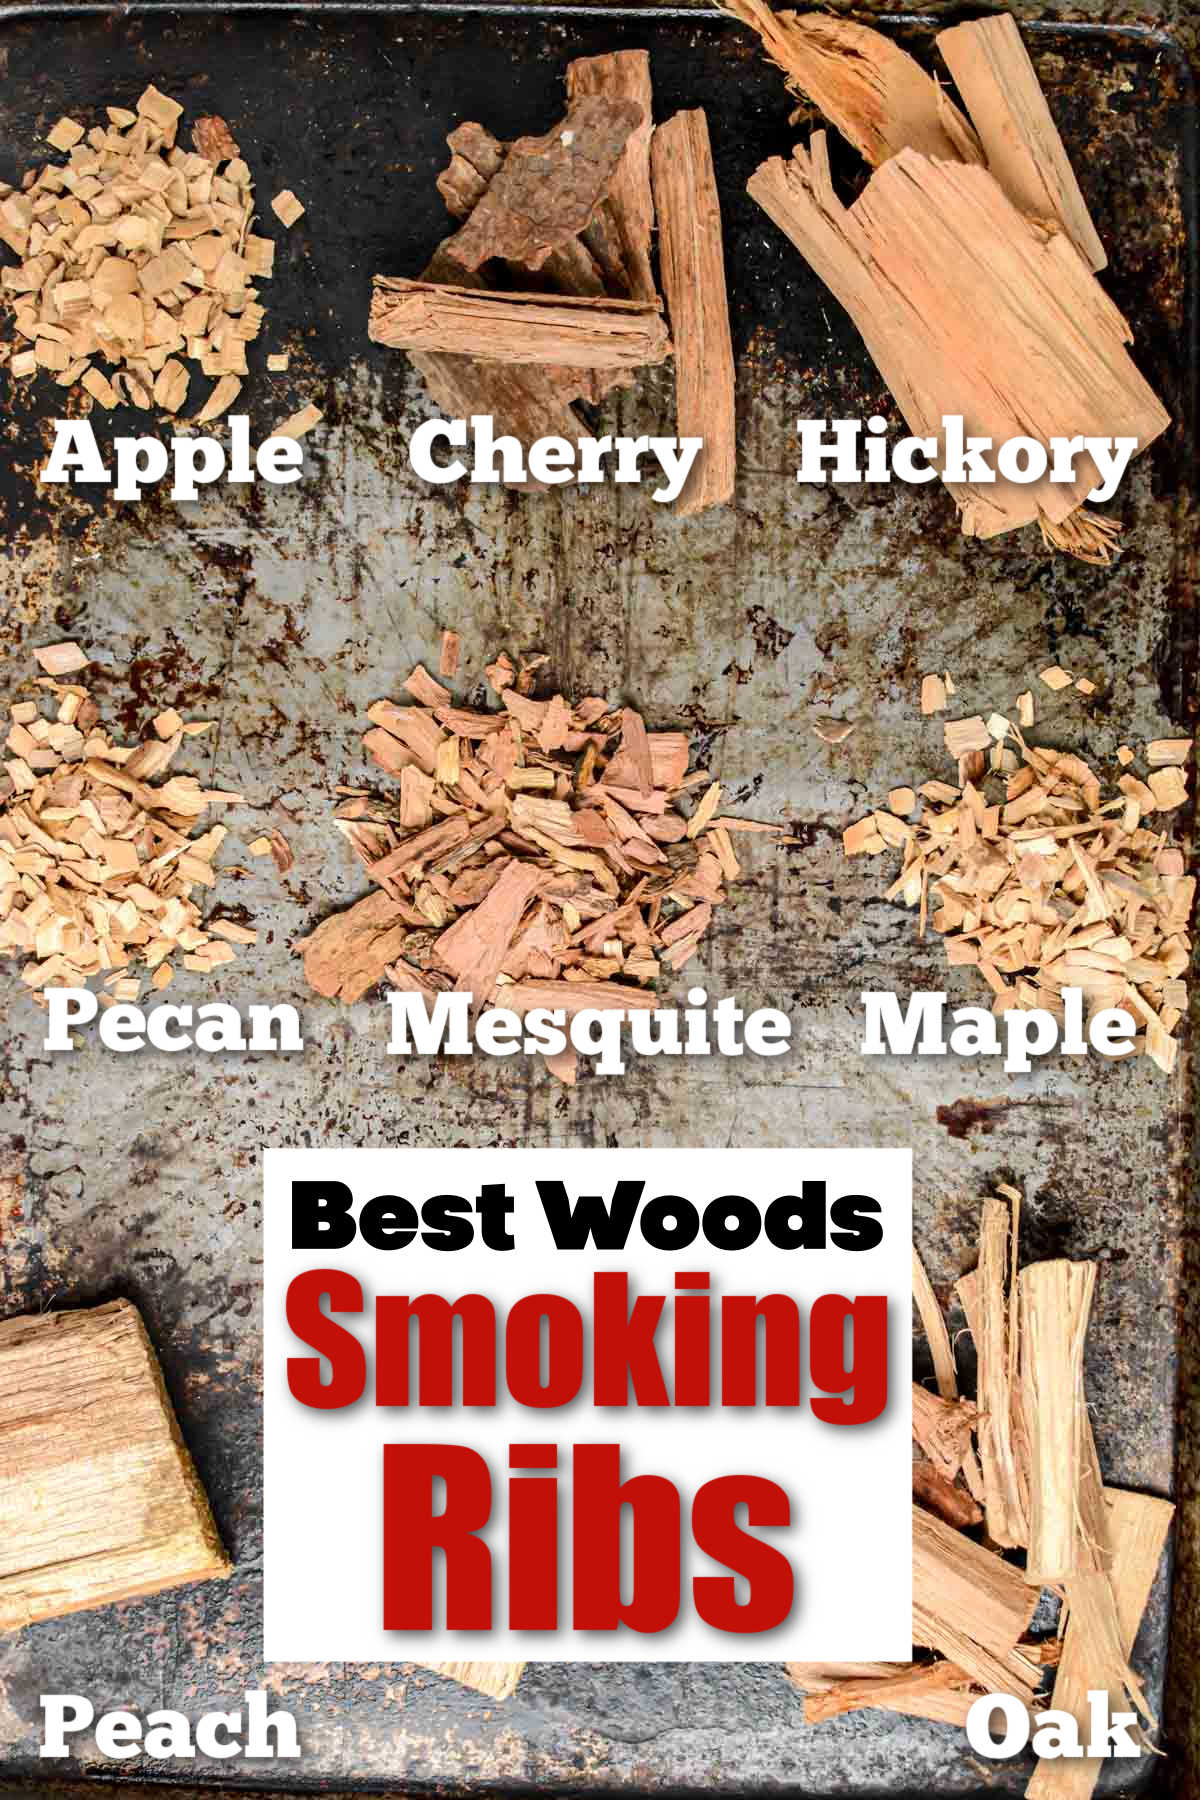 Best Wood for Smoking Ribs